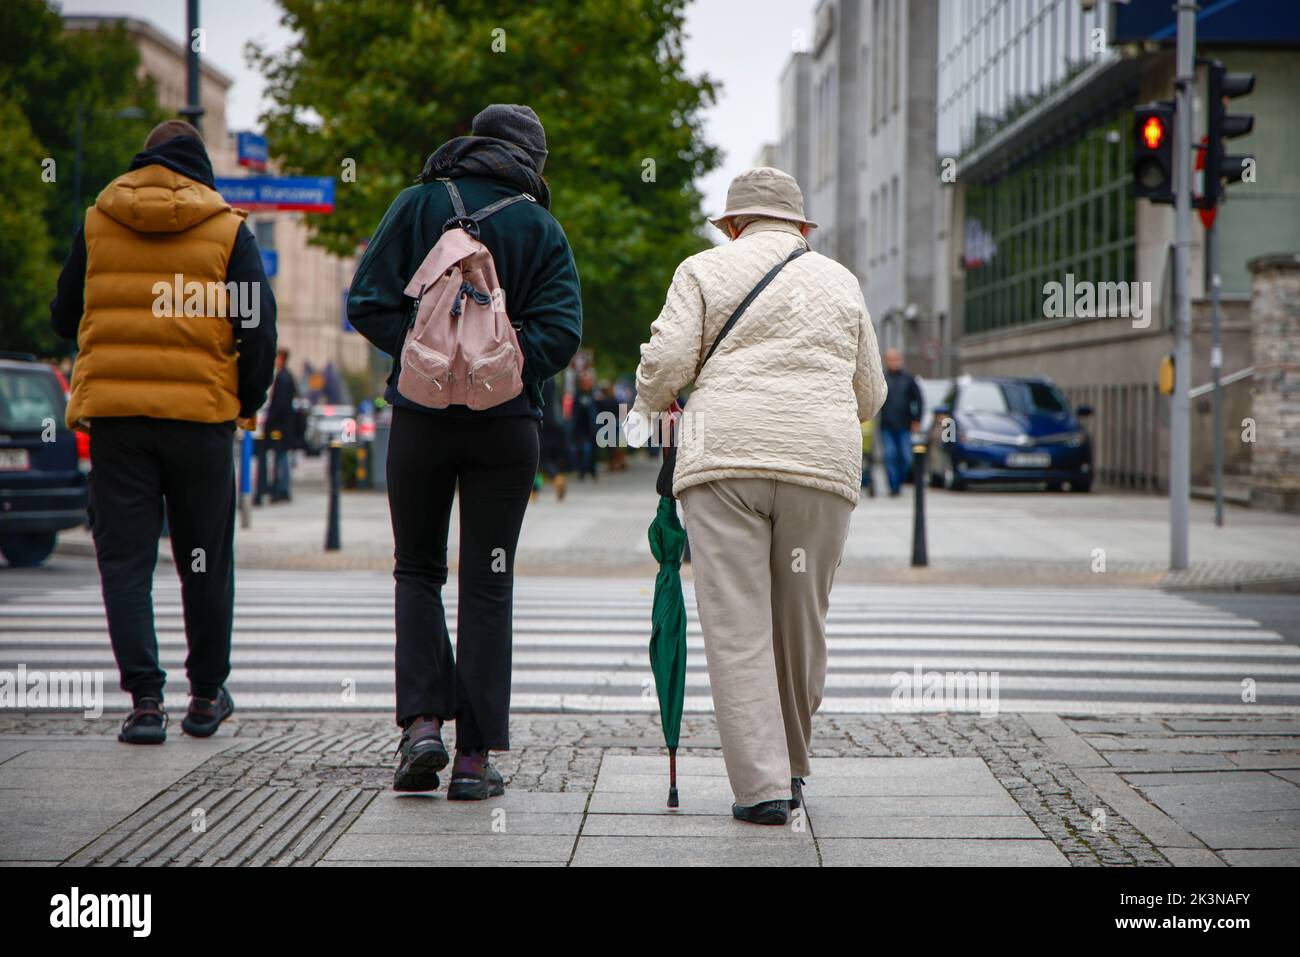 An elderly woman and a younger woman walk side by side in Warsaw, Poland on 27 September, 2022. Poland's agein population has sharply decreased Poland's agein population has sharply decreased in just the last decade, declining by nearly Poland's agein population has sharply decreased in just the last decade, declining by nearly half a million. The country's population is also ageing Poland's agein population has sharply decreased in just the last decade, declining by nearly half a million. The country's population is also ageing with every fifth citizen being 65 years or over according to the Stock Photo